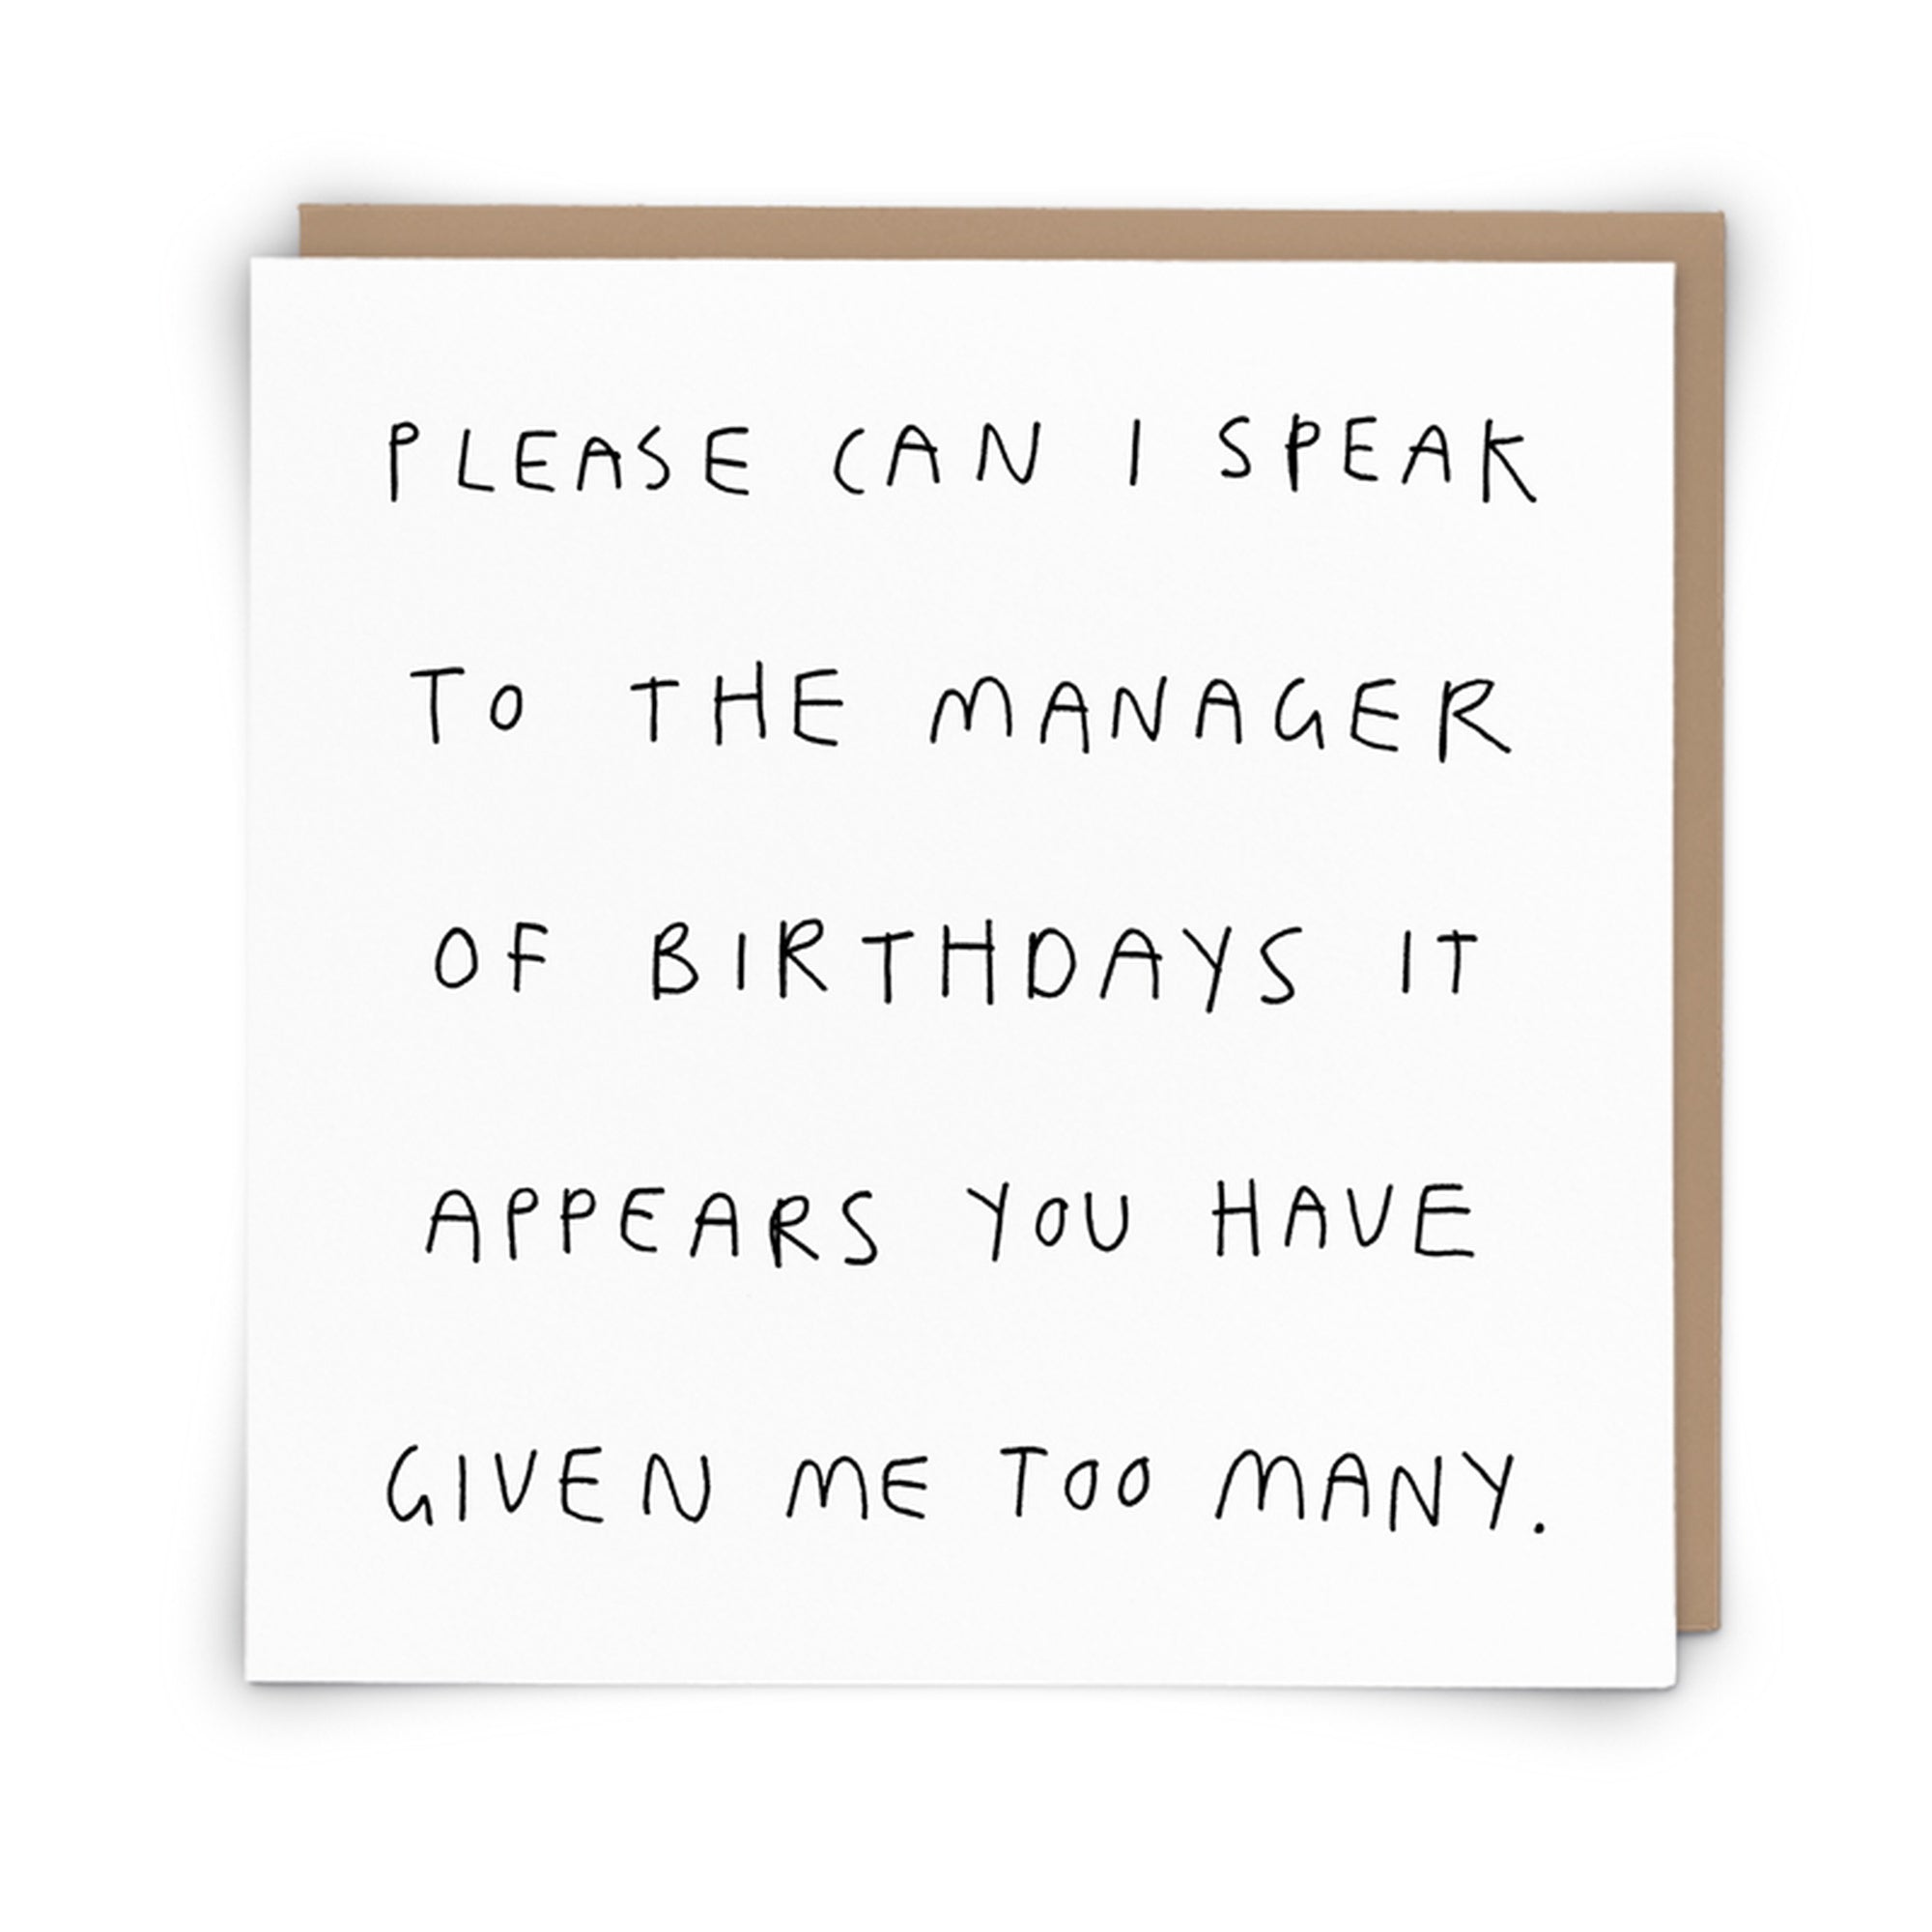 Manager of Birthdays Funny Card from Penny Black